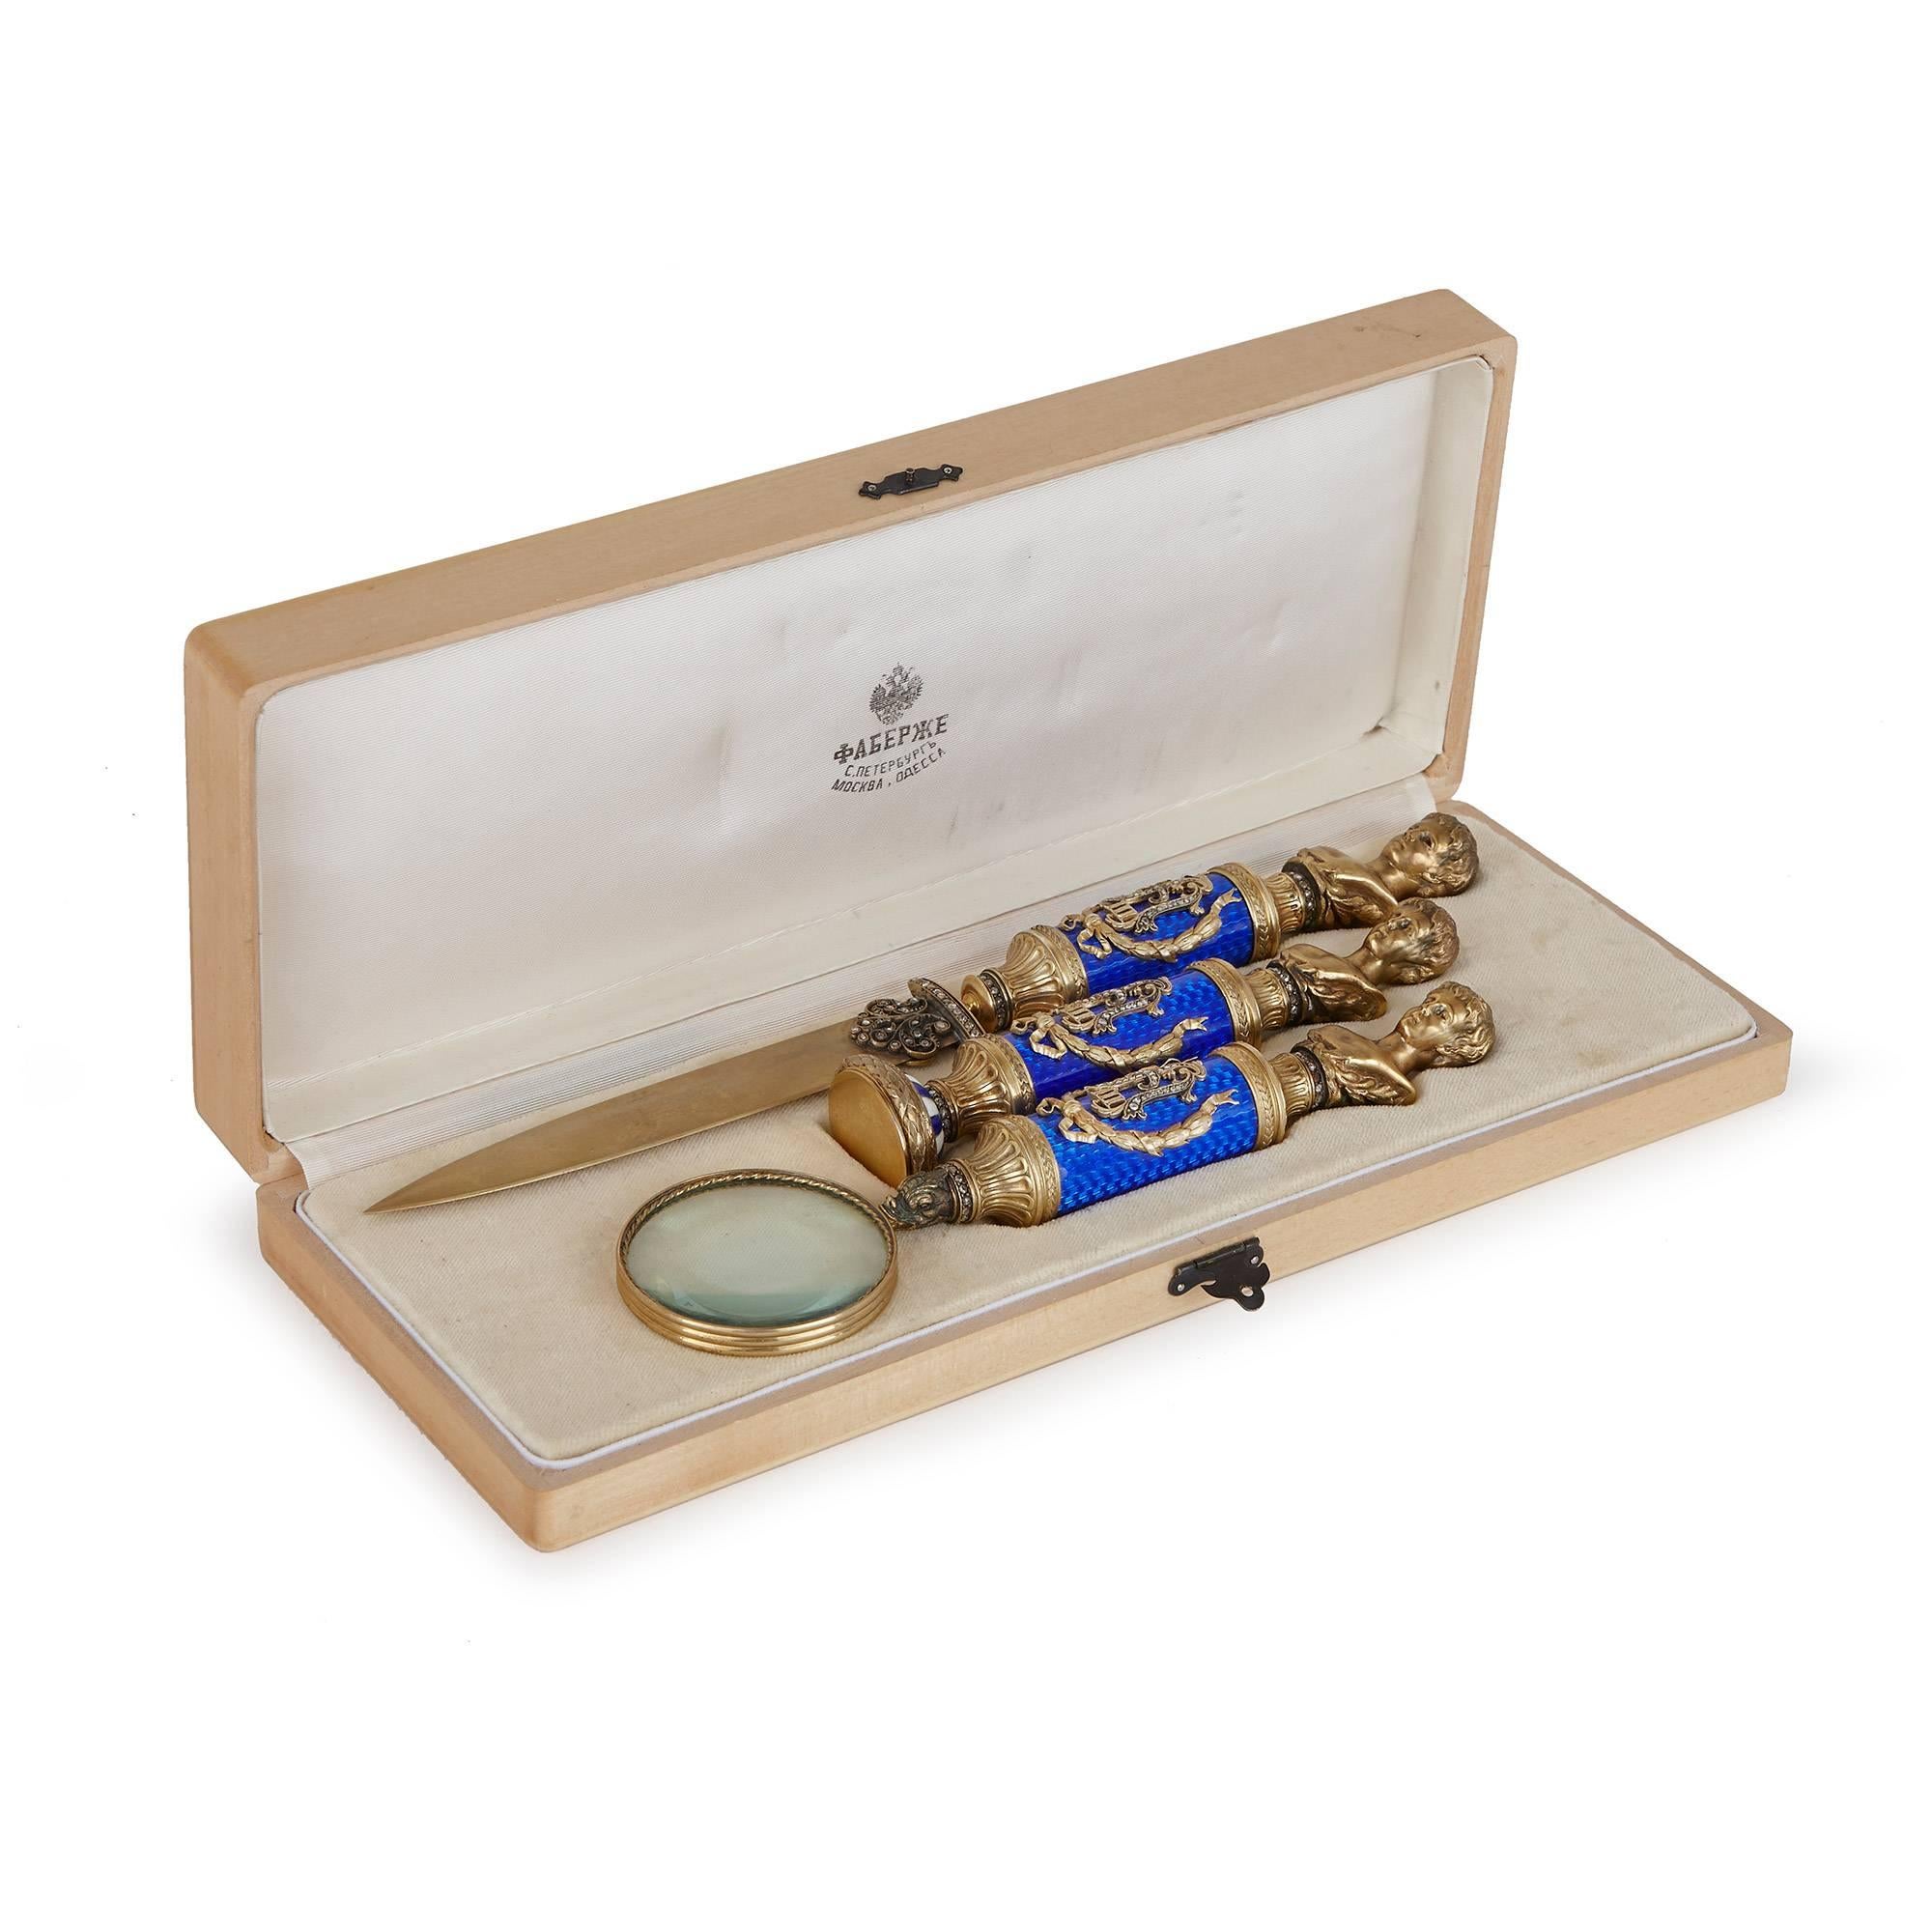 This beautiful three-piece desk set has been carefully crafted in the style of Faberge. The set comprises a letter opener, a seal and a magnifying glass, all similarly decorated with diamond Emperor Alexander III monogram against a blue guilloche